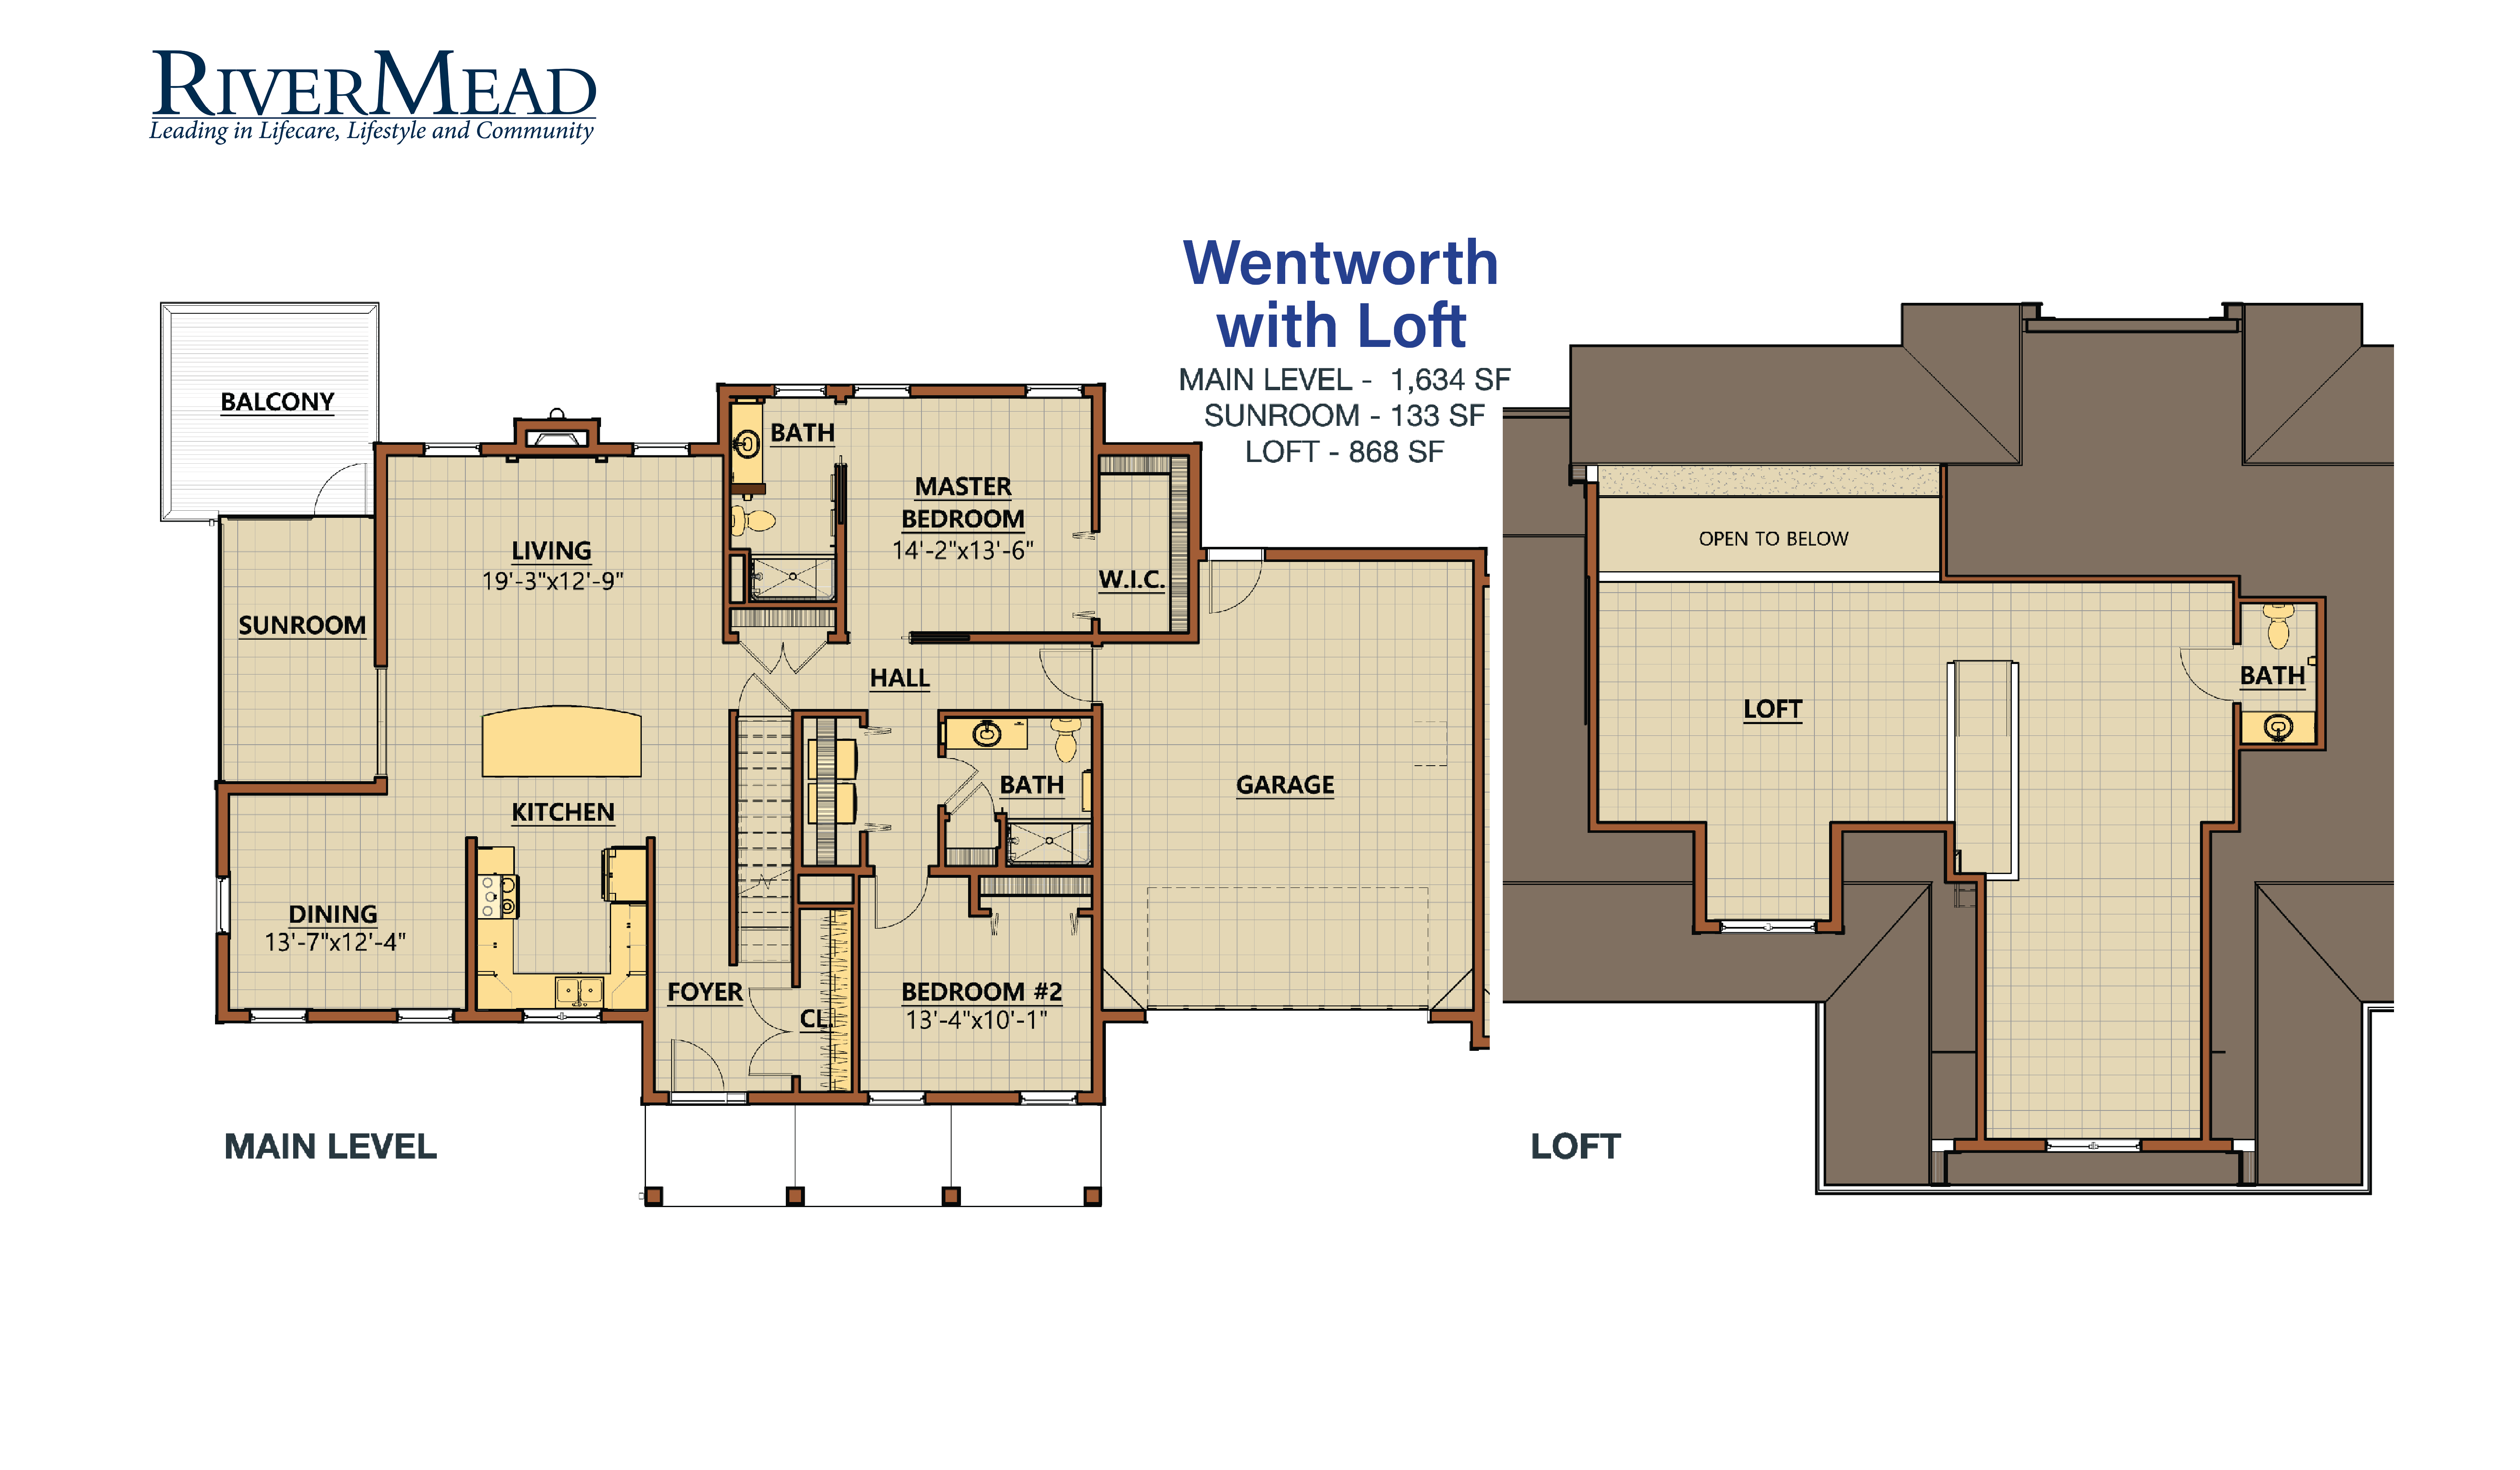 Site WENTWORTH with Loft